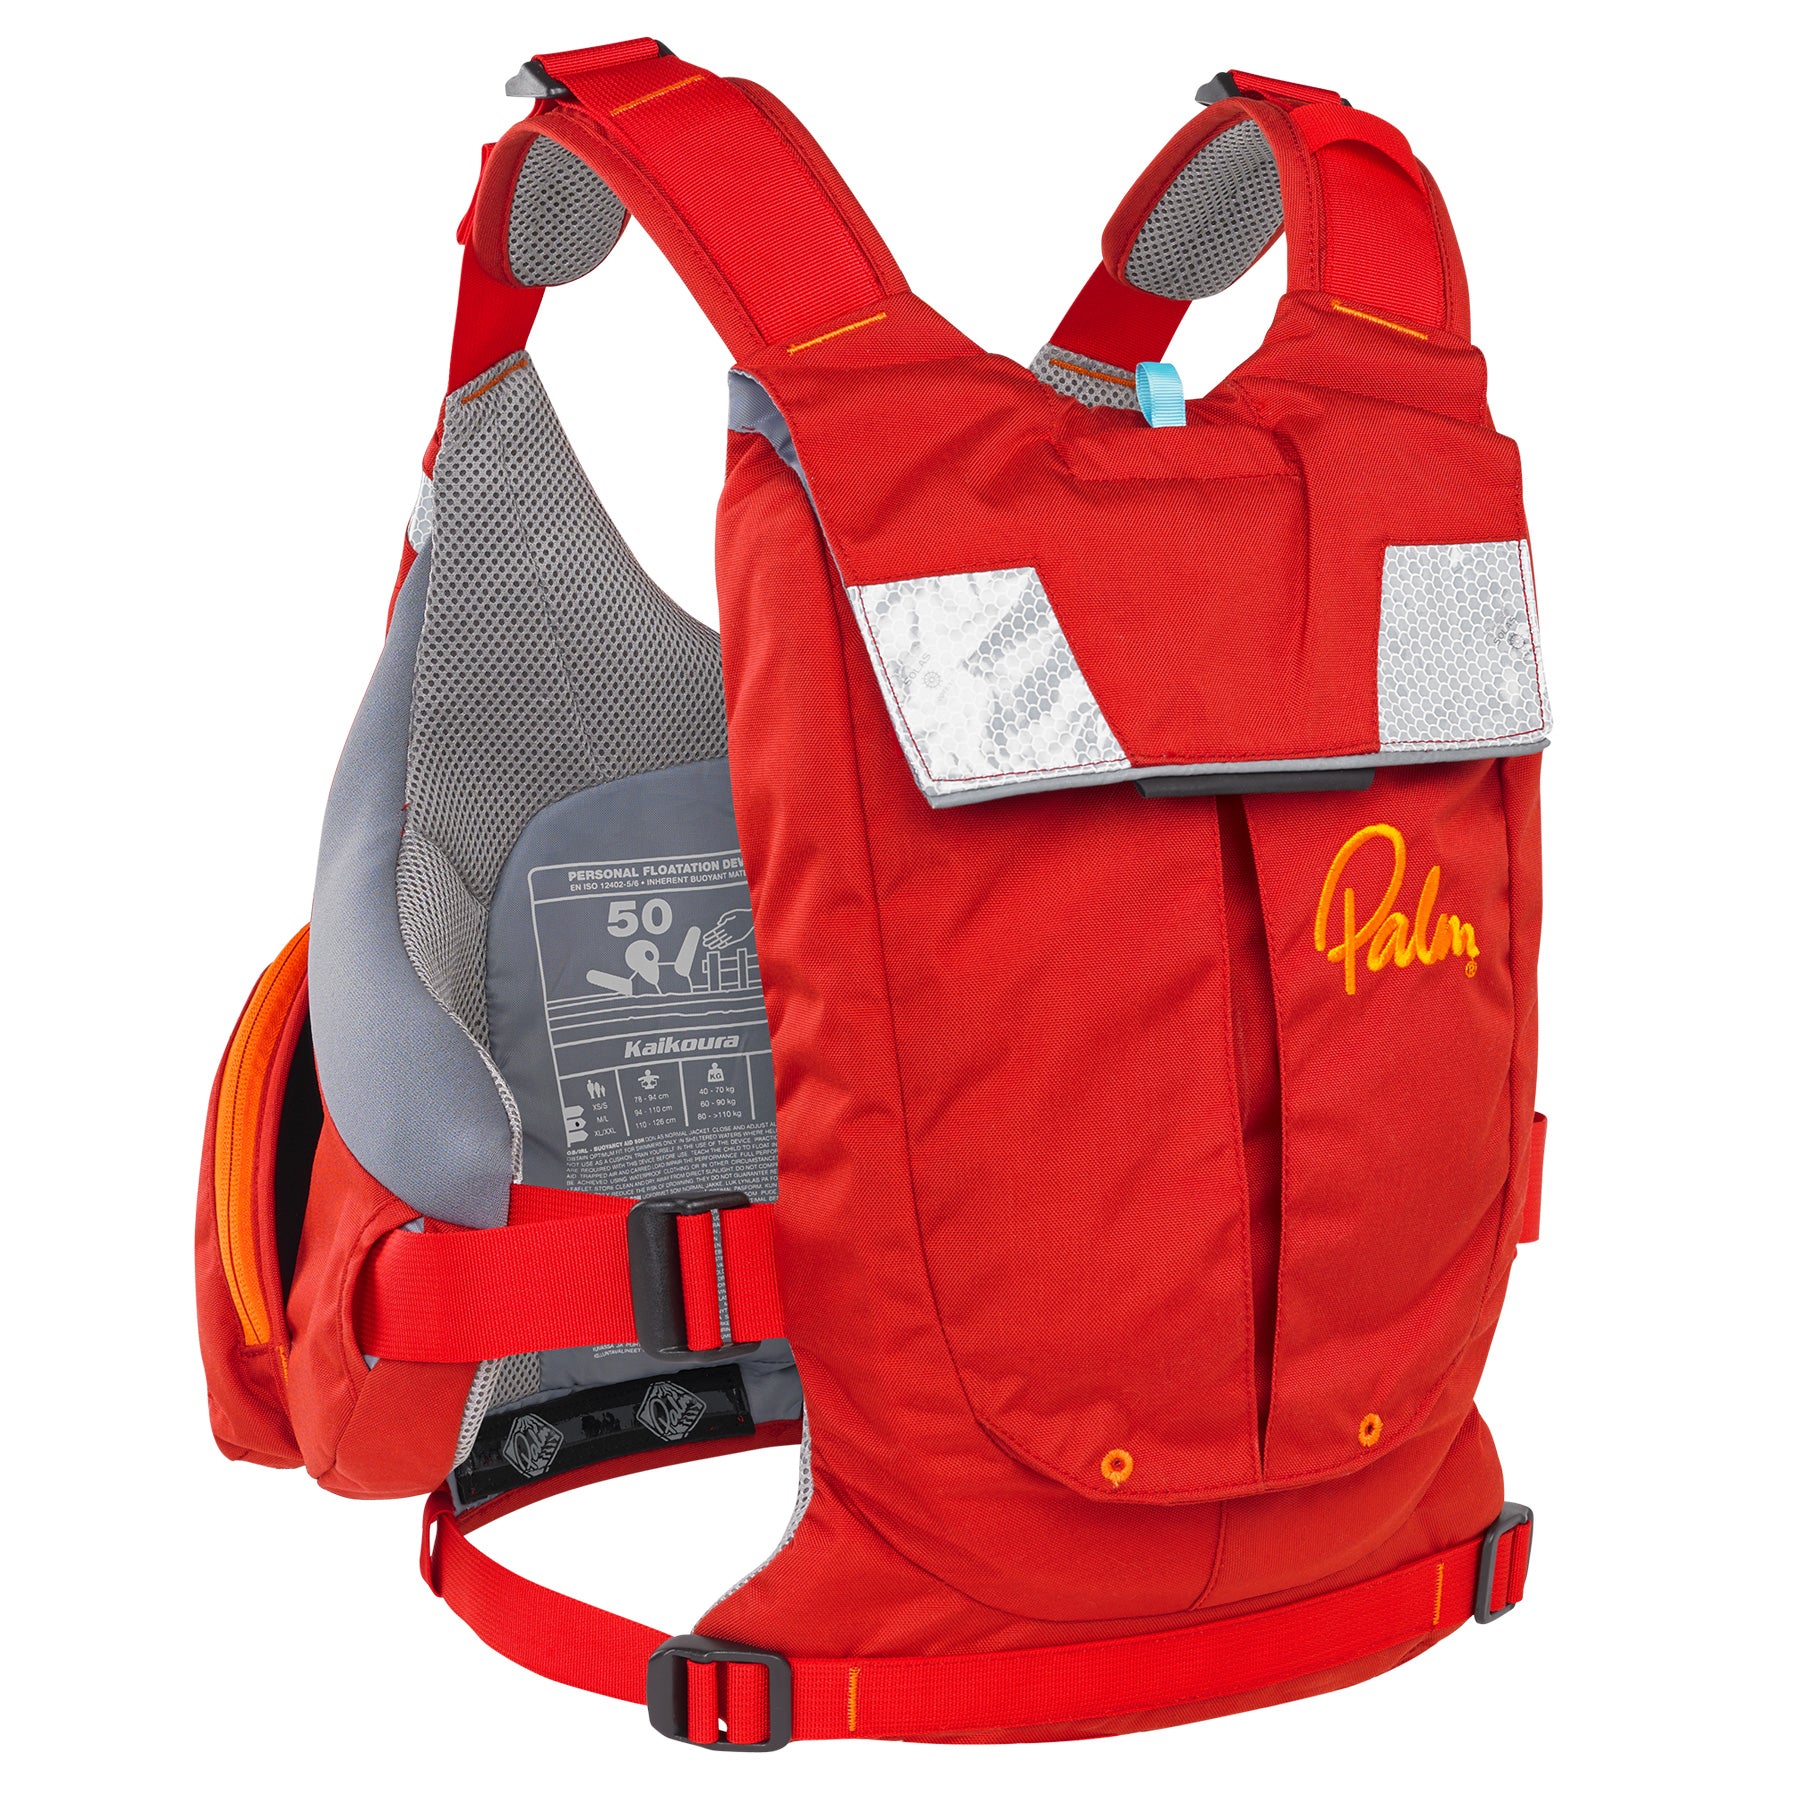 Palm Kaikoura in red from the rear showing the hydration pocket and reflective strips